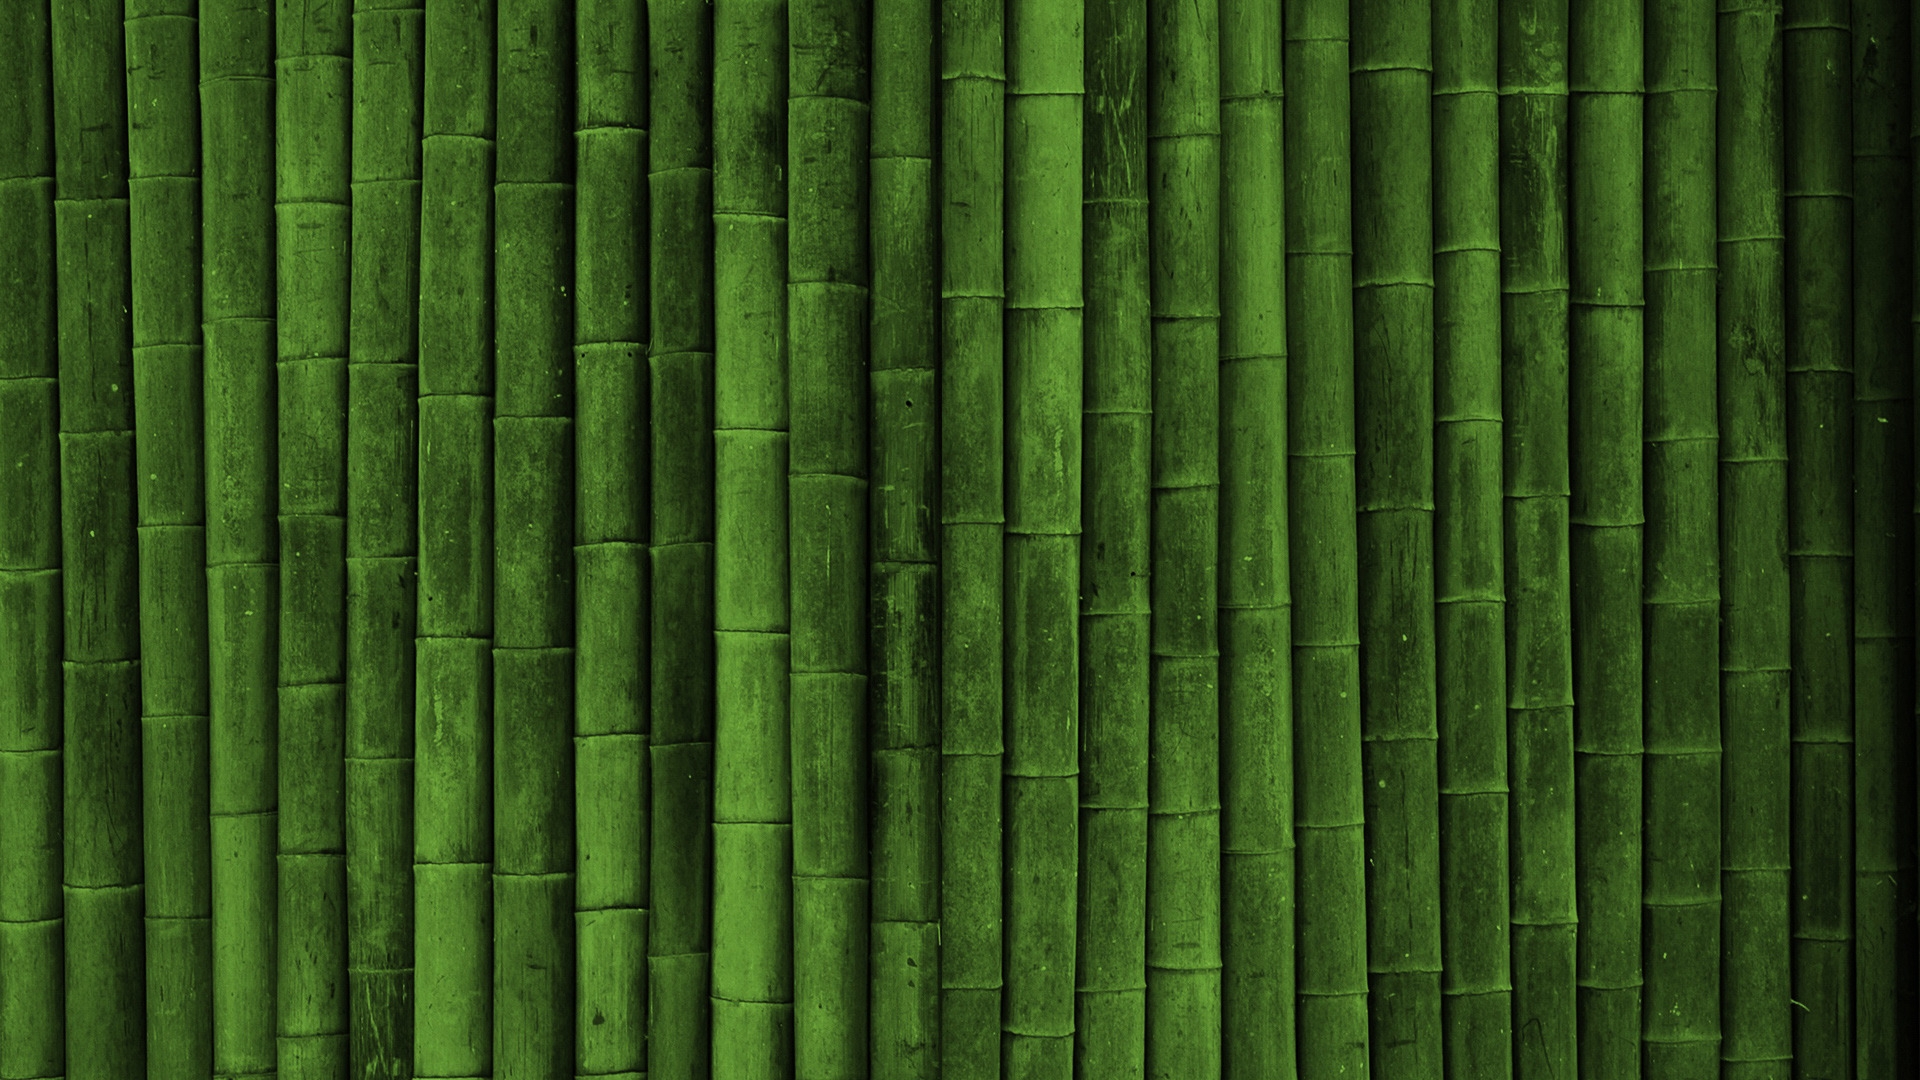 Bamboo for 1920 x 1080 HDTV 1080p resolution